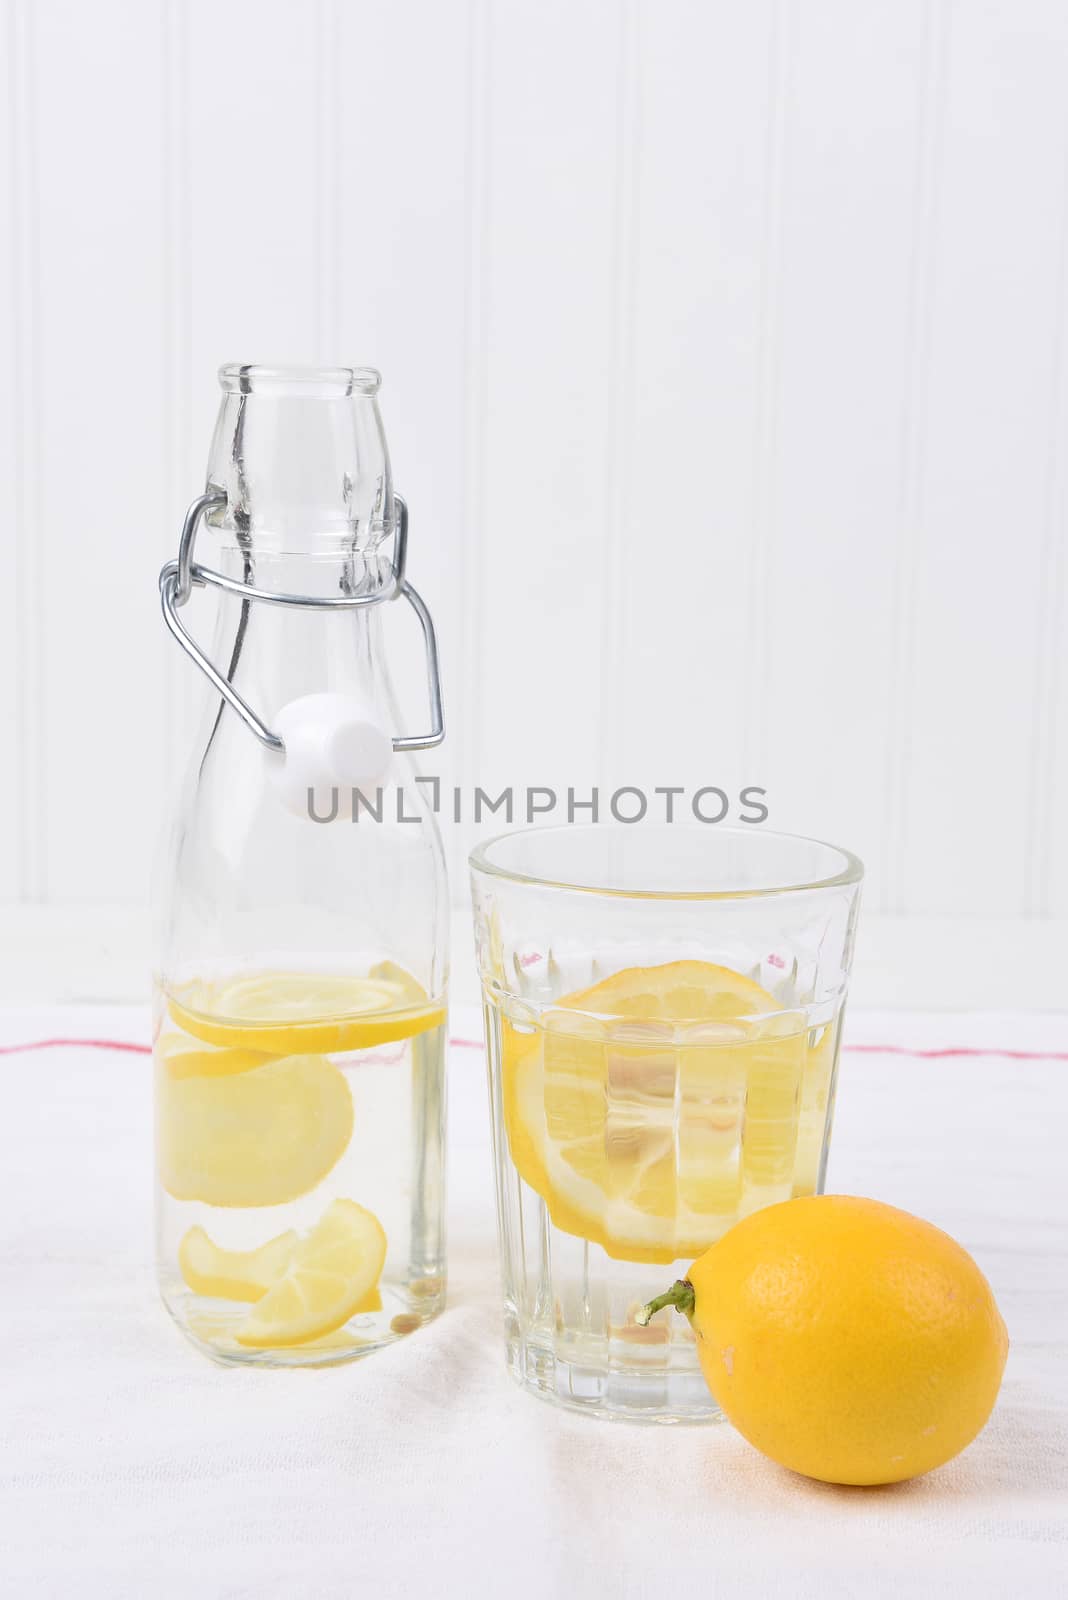 A swing top bottle and glass of lemon water on a linen towel in an all white set.